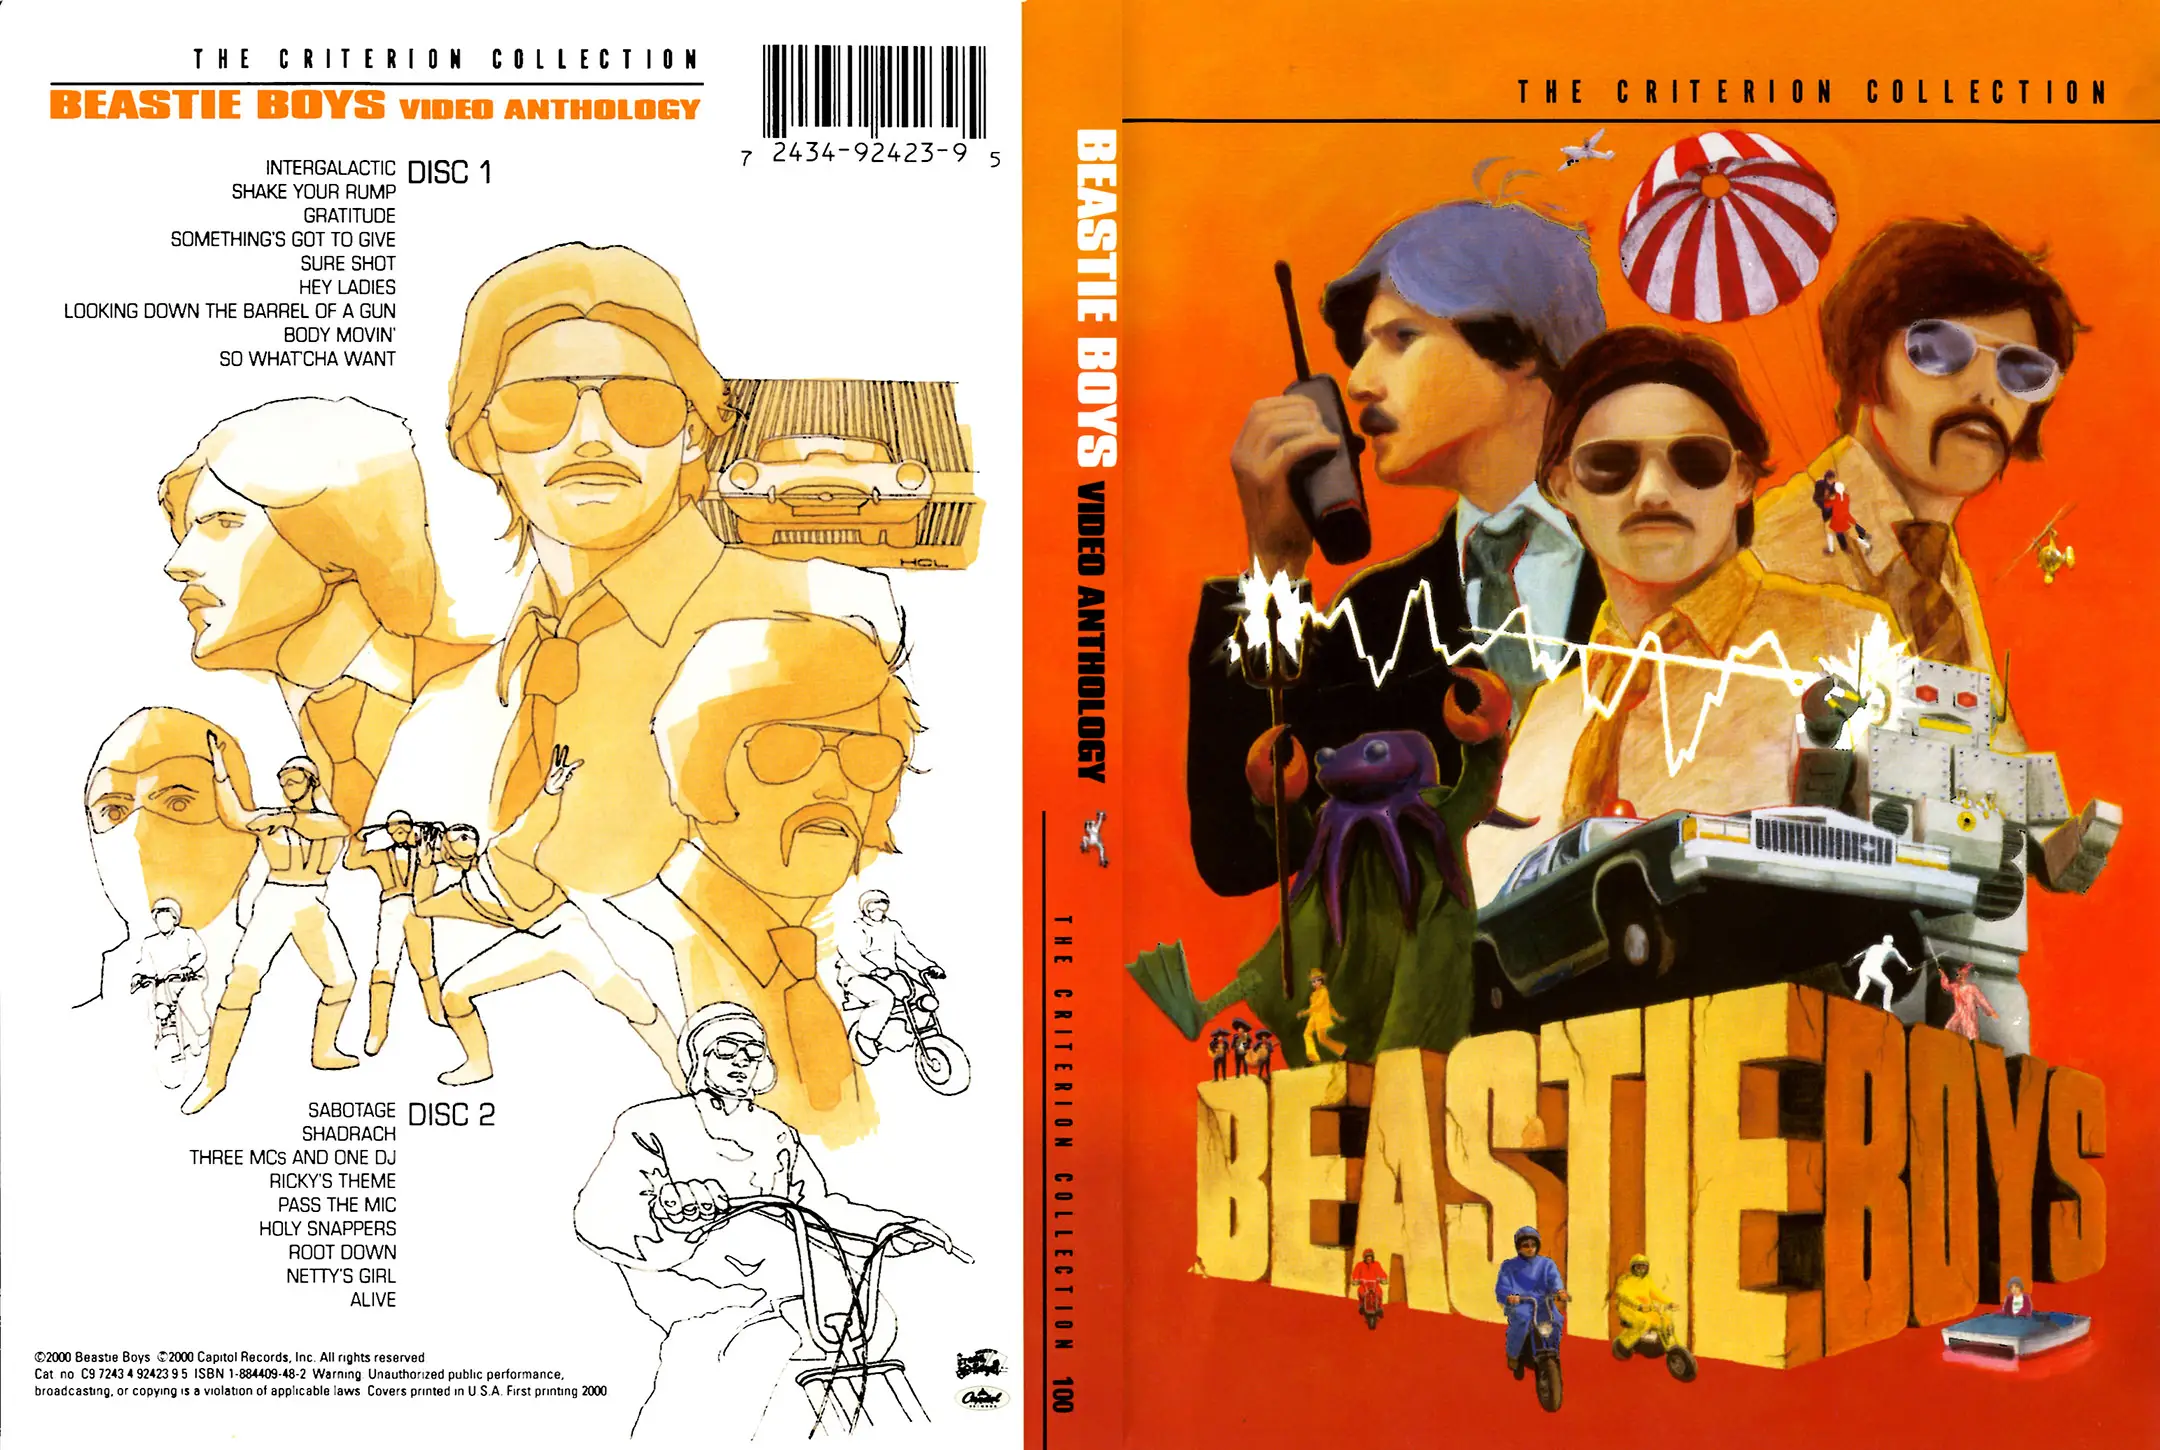 Beastie Boys - Video Anthology (2000) [The Criterion Collection #100] Re-Up